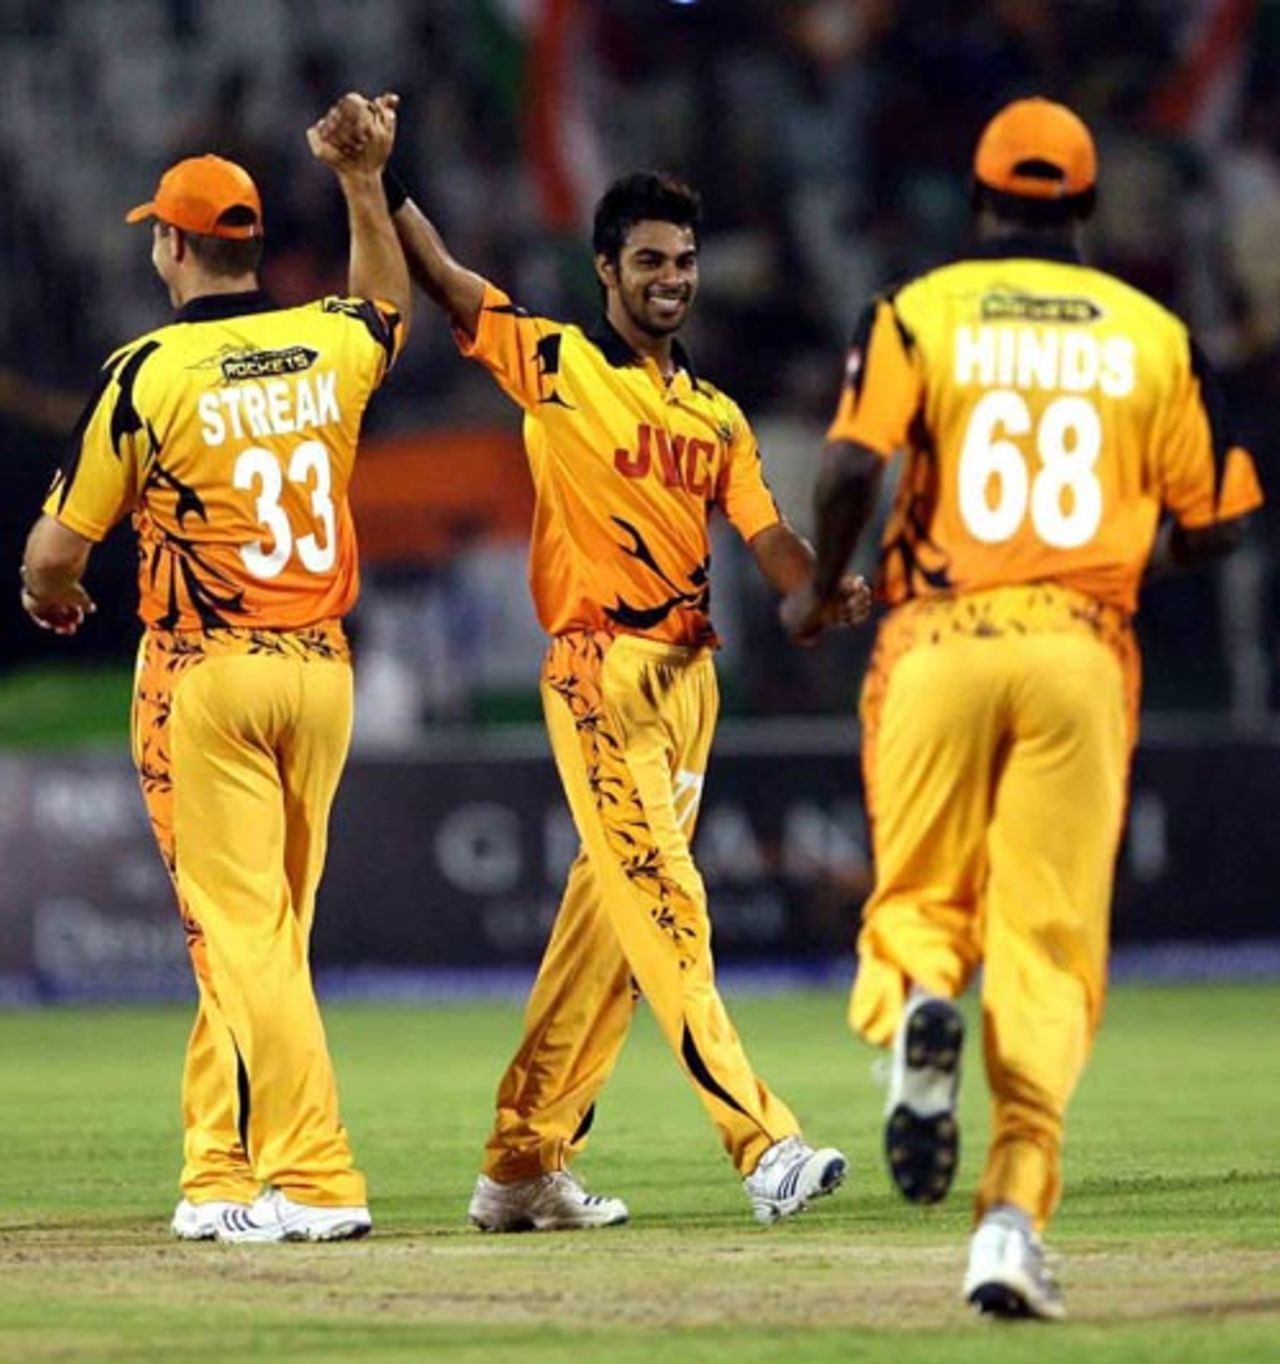 Sumit Kalia celebrates one of his four wickets, Ahmedabad Rockets v Lahore Badshahs, Indian Cricket League, Hyderabad, March 30, 2008